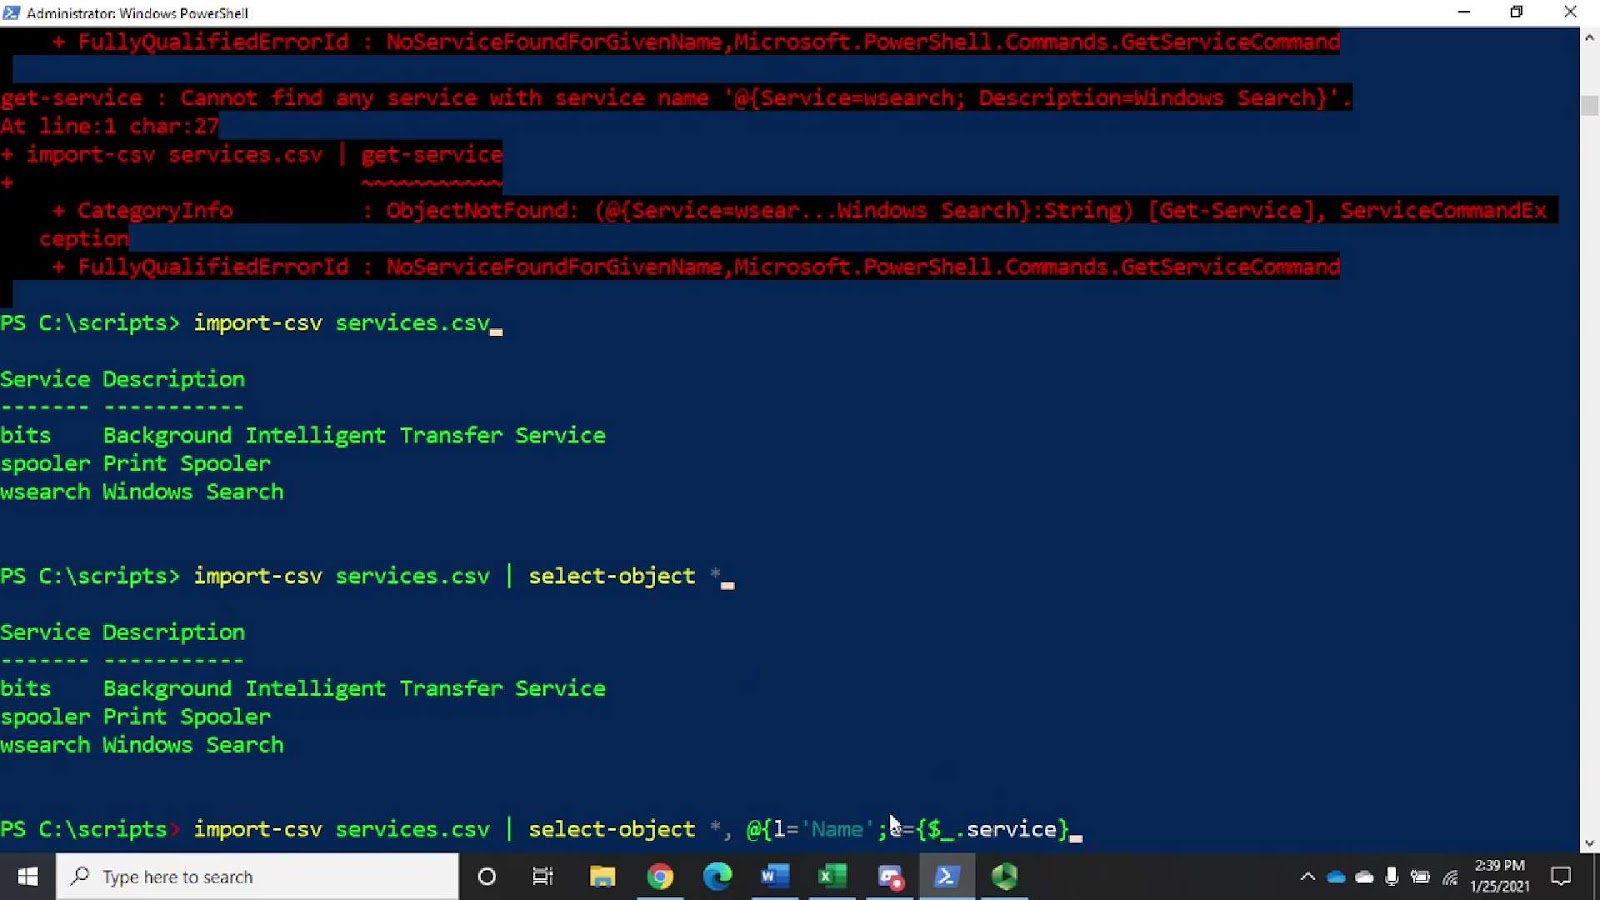 Process of pipeline input in powershell